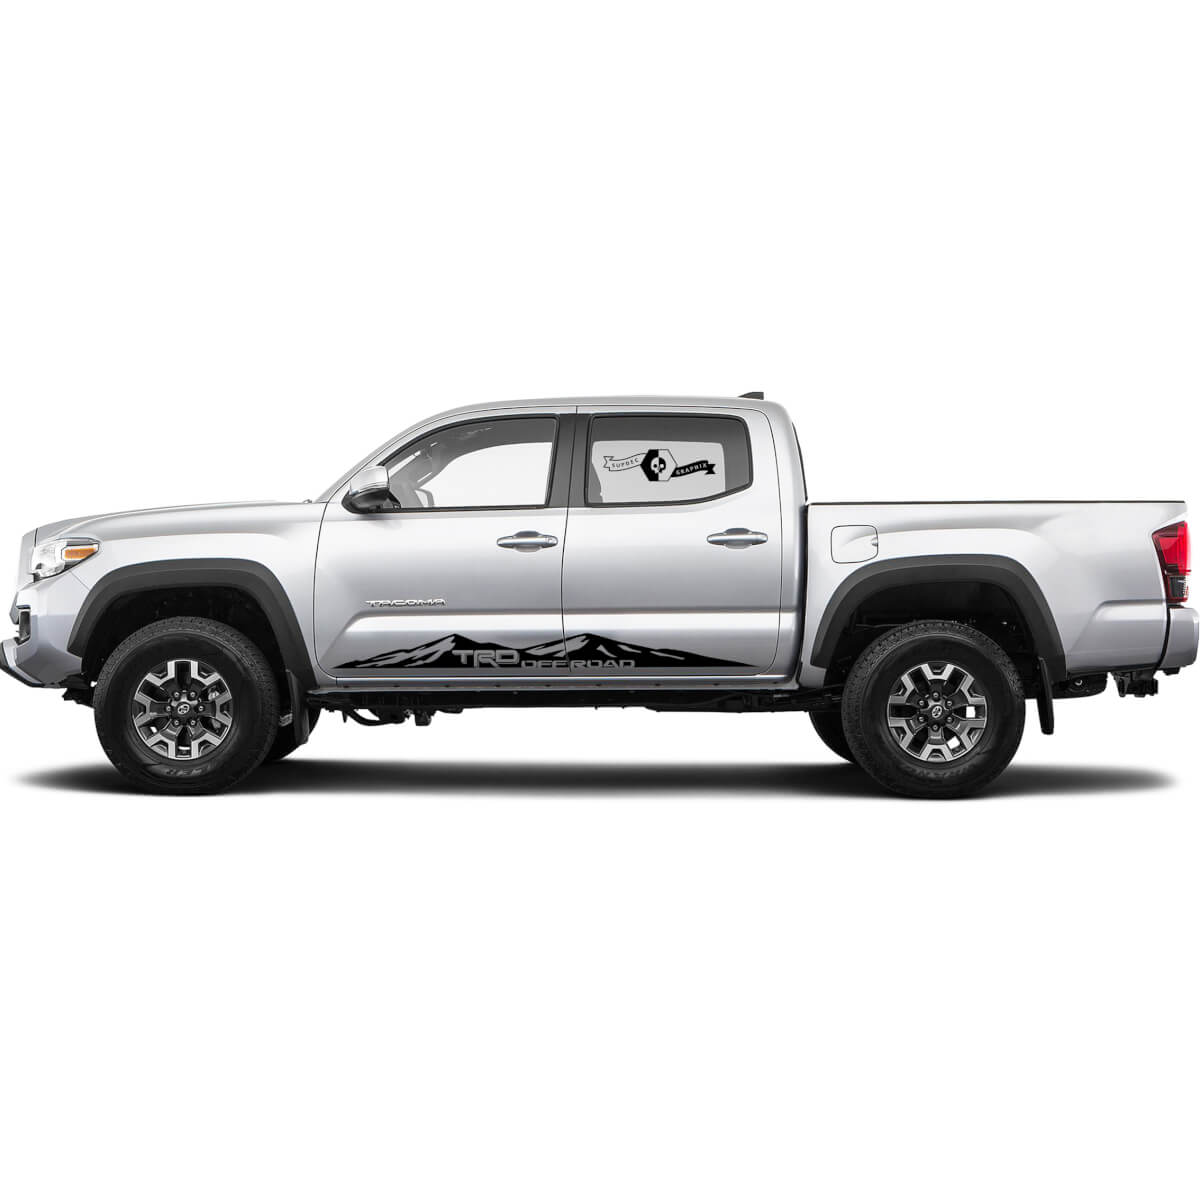 TRD off road Mountains Style for Side Rocker Panel Truck Decals Stickers for Tacoma Tundra Hilux 4Runner 5